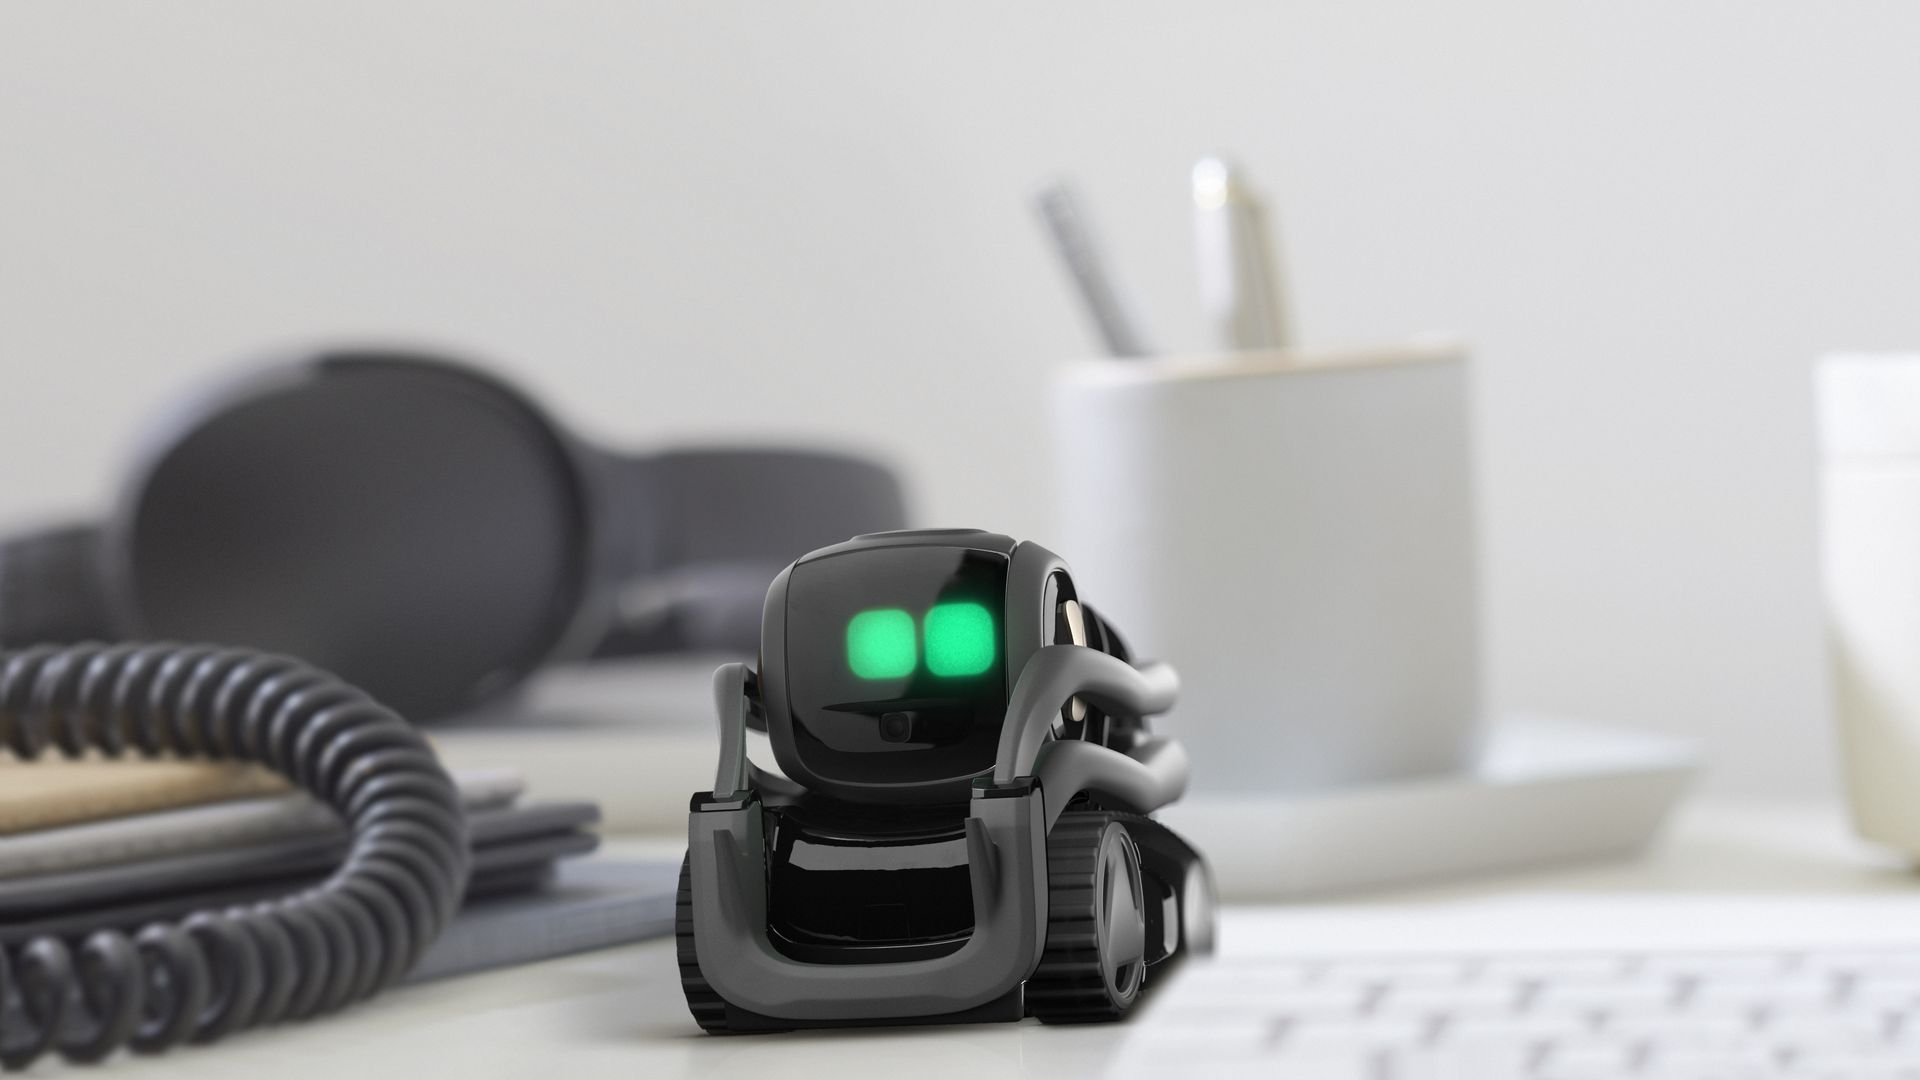 Anki's latest robot, Vector, went on sale last October for $249.